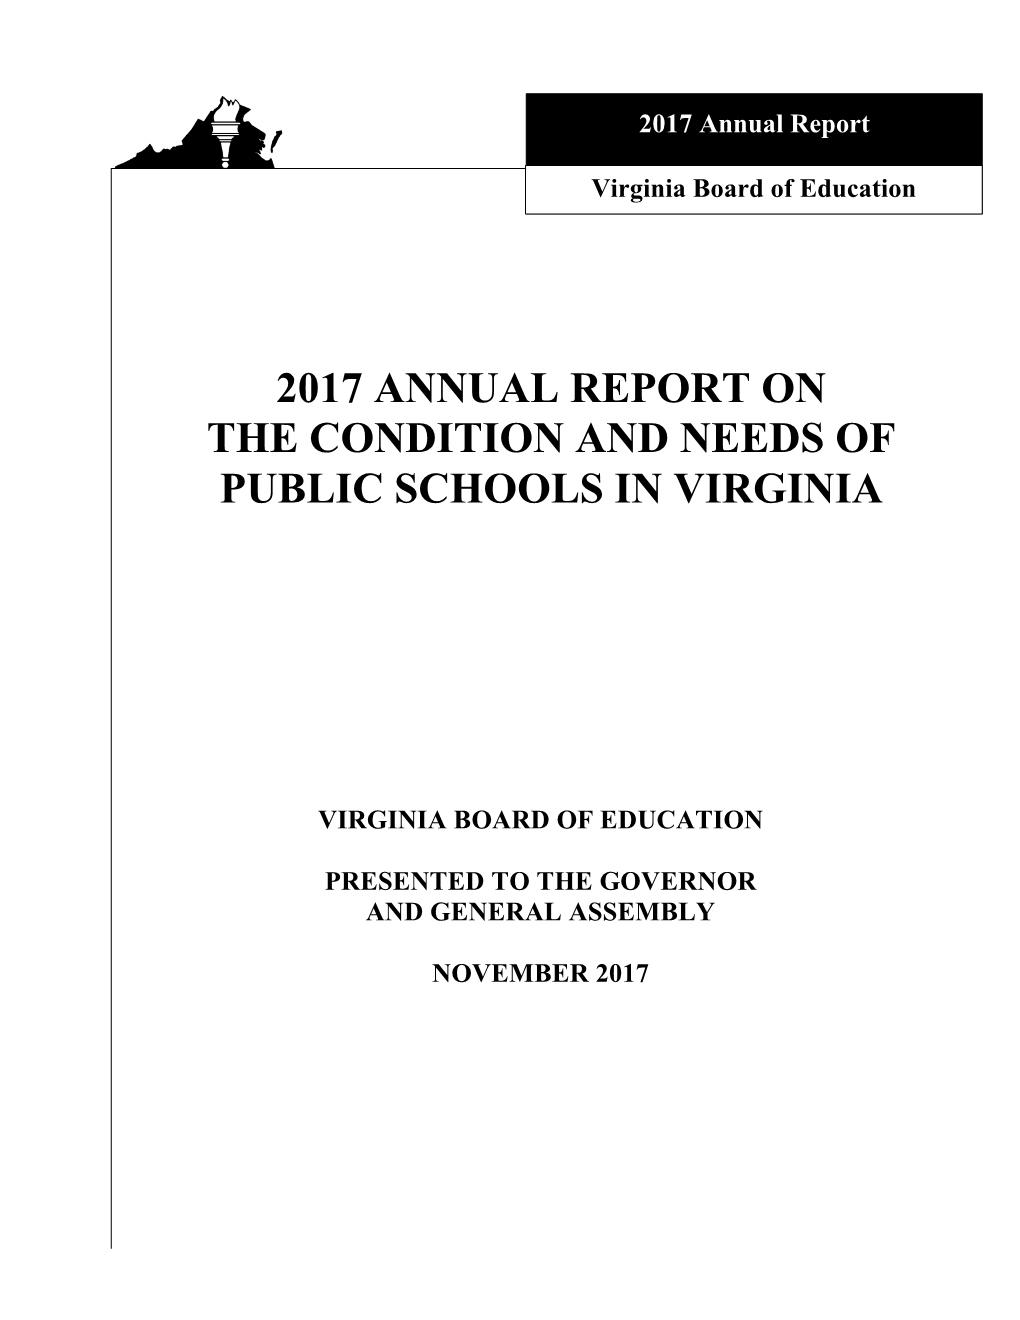 2017 Annual Report on the Condition and Needs of Public Schools in Virginia